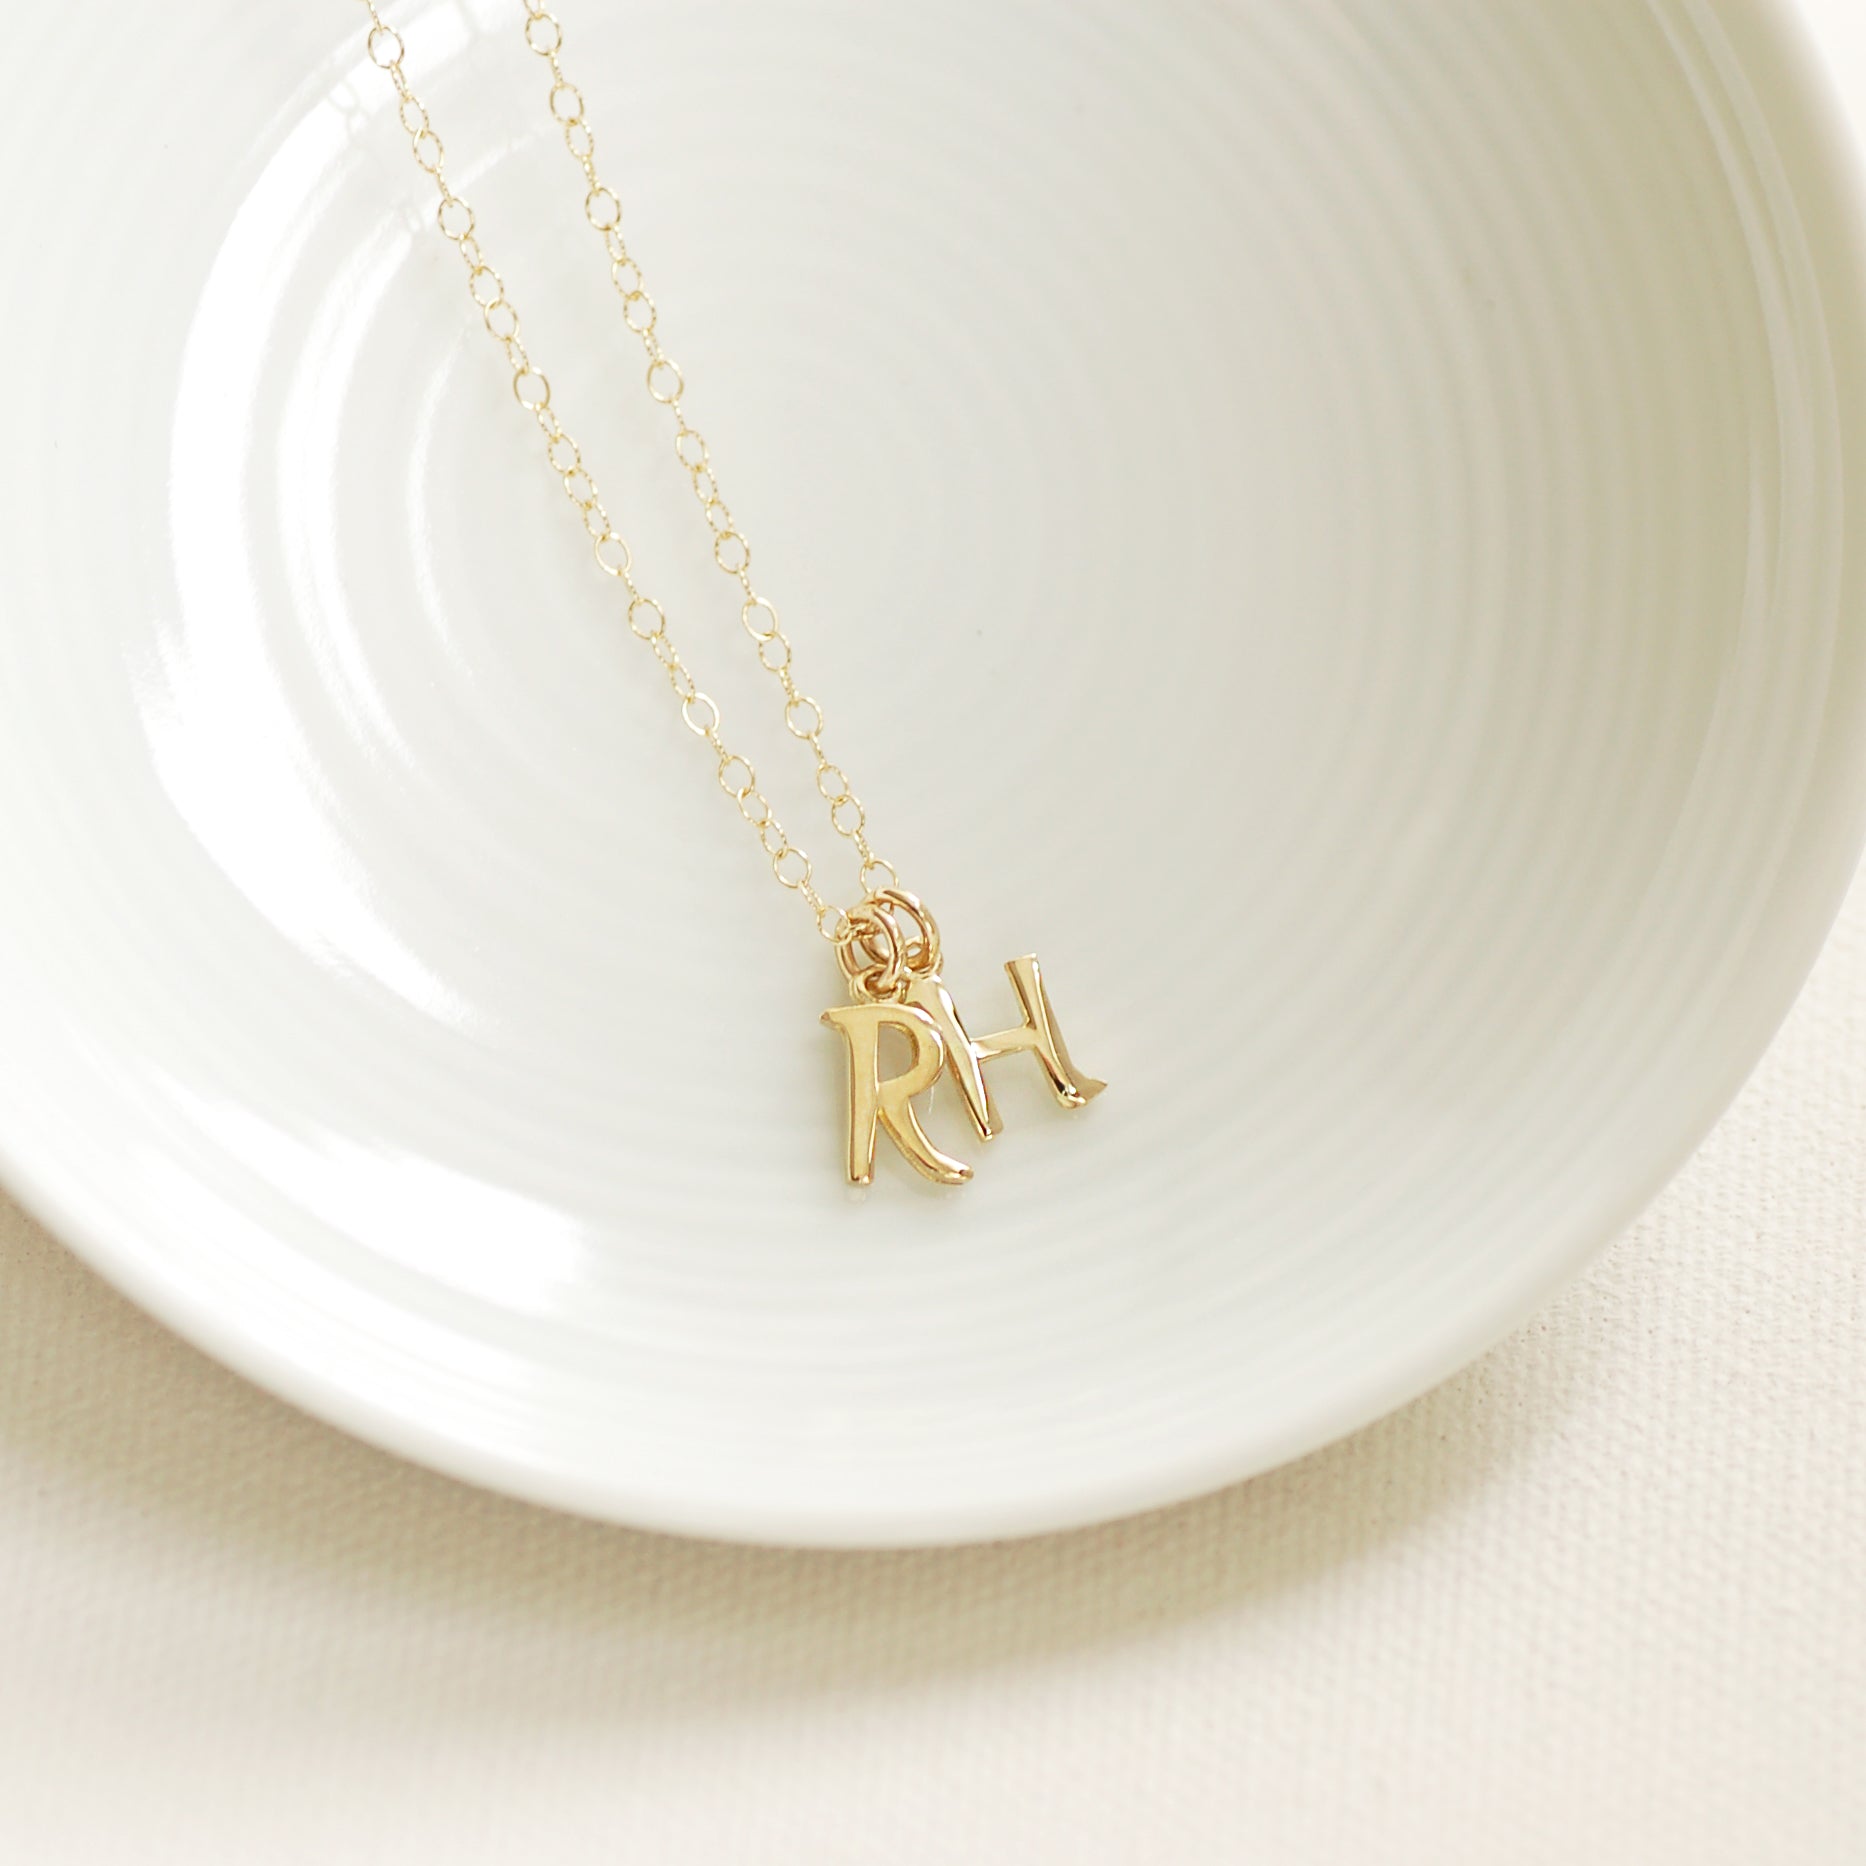 Lower Case Initial Necklace, Gold Initial, Gold Letter,initial Letter, Letter  Necklace, Personalized Necklace, Gift for Her, Custom Jewelry - Etsy | Initial  necklace gold, Initial necklace, Personalized jewelry